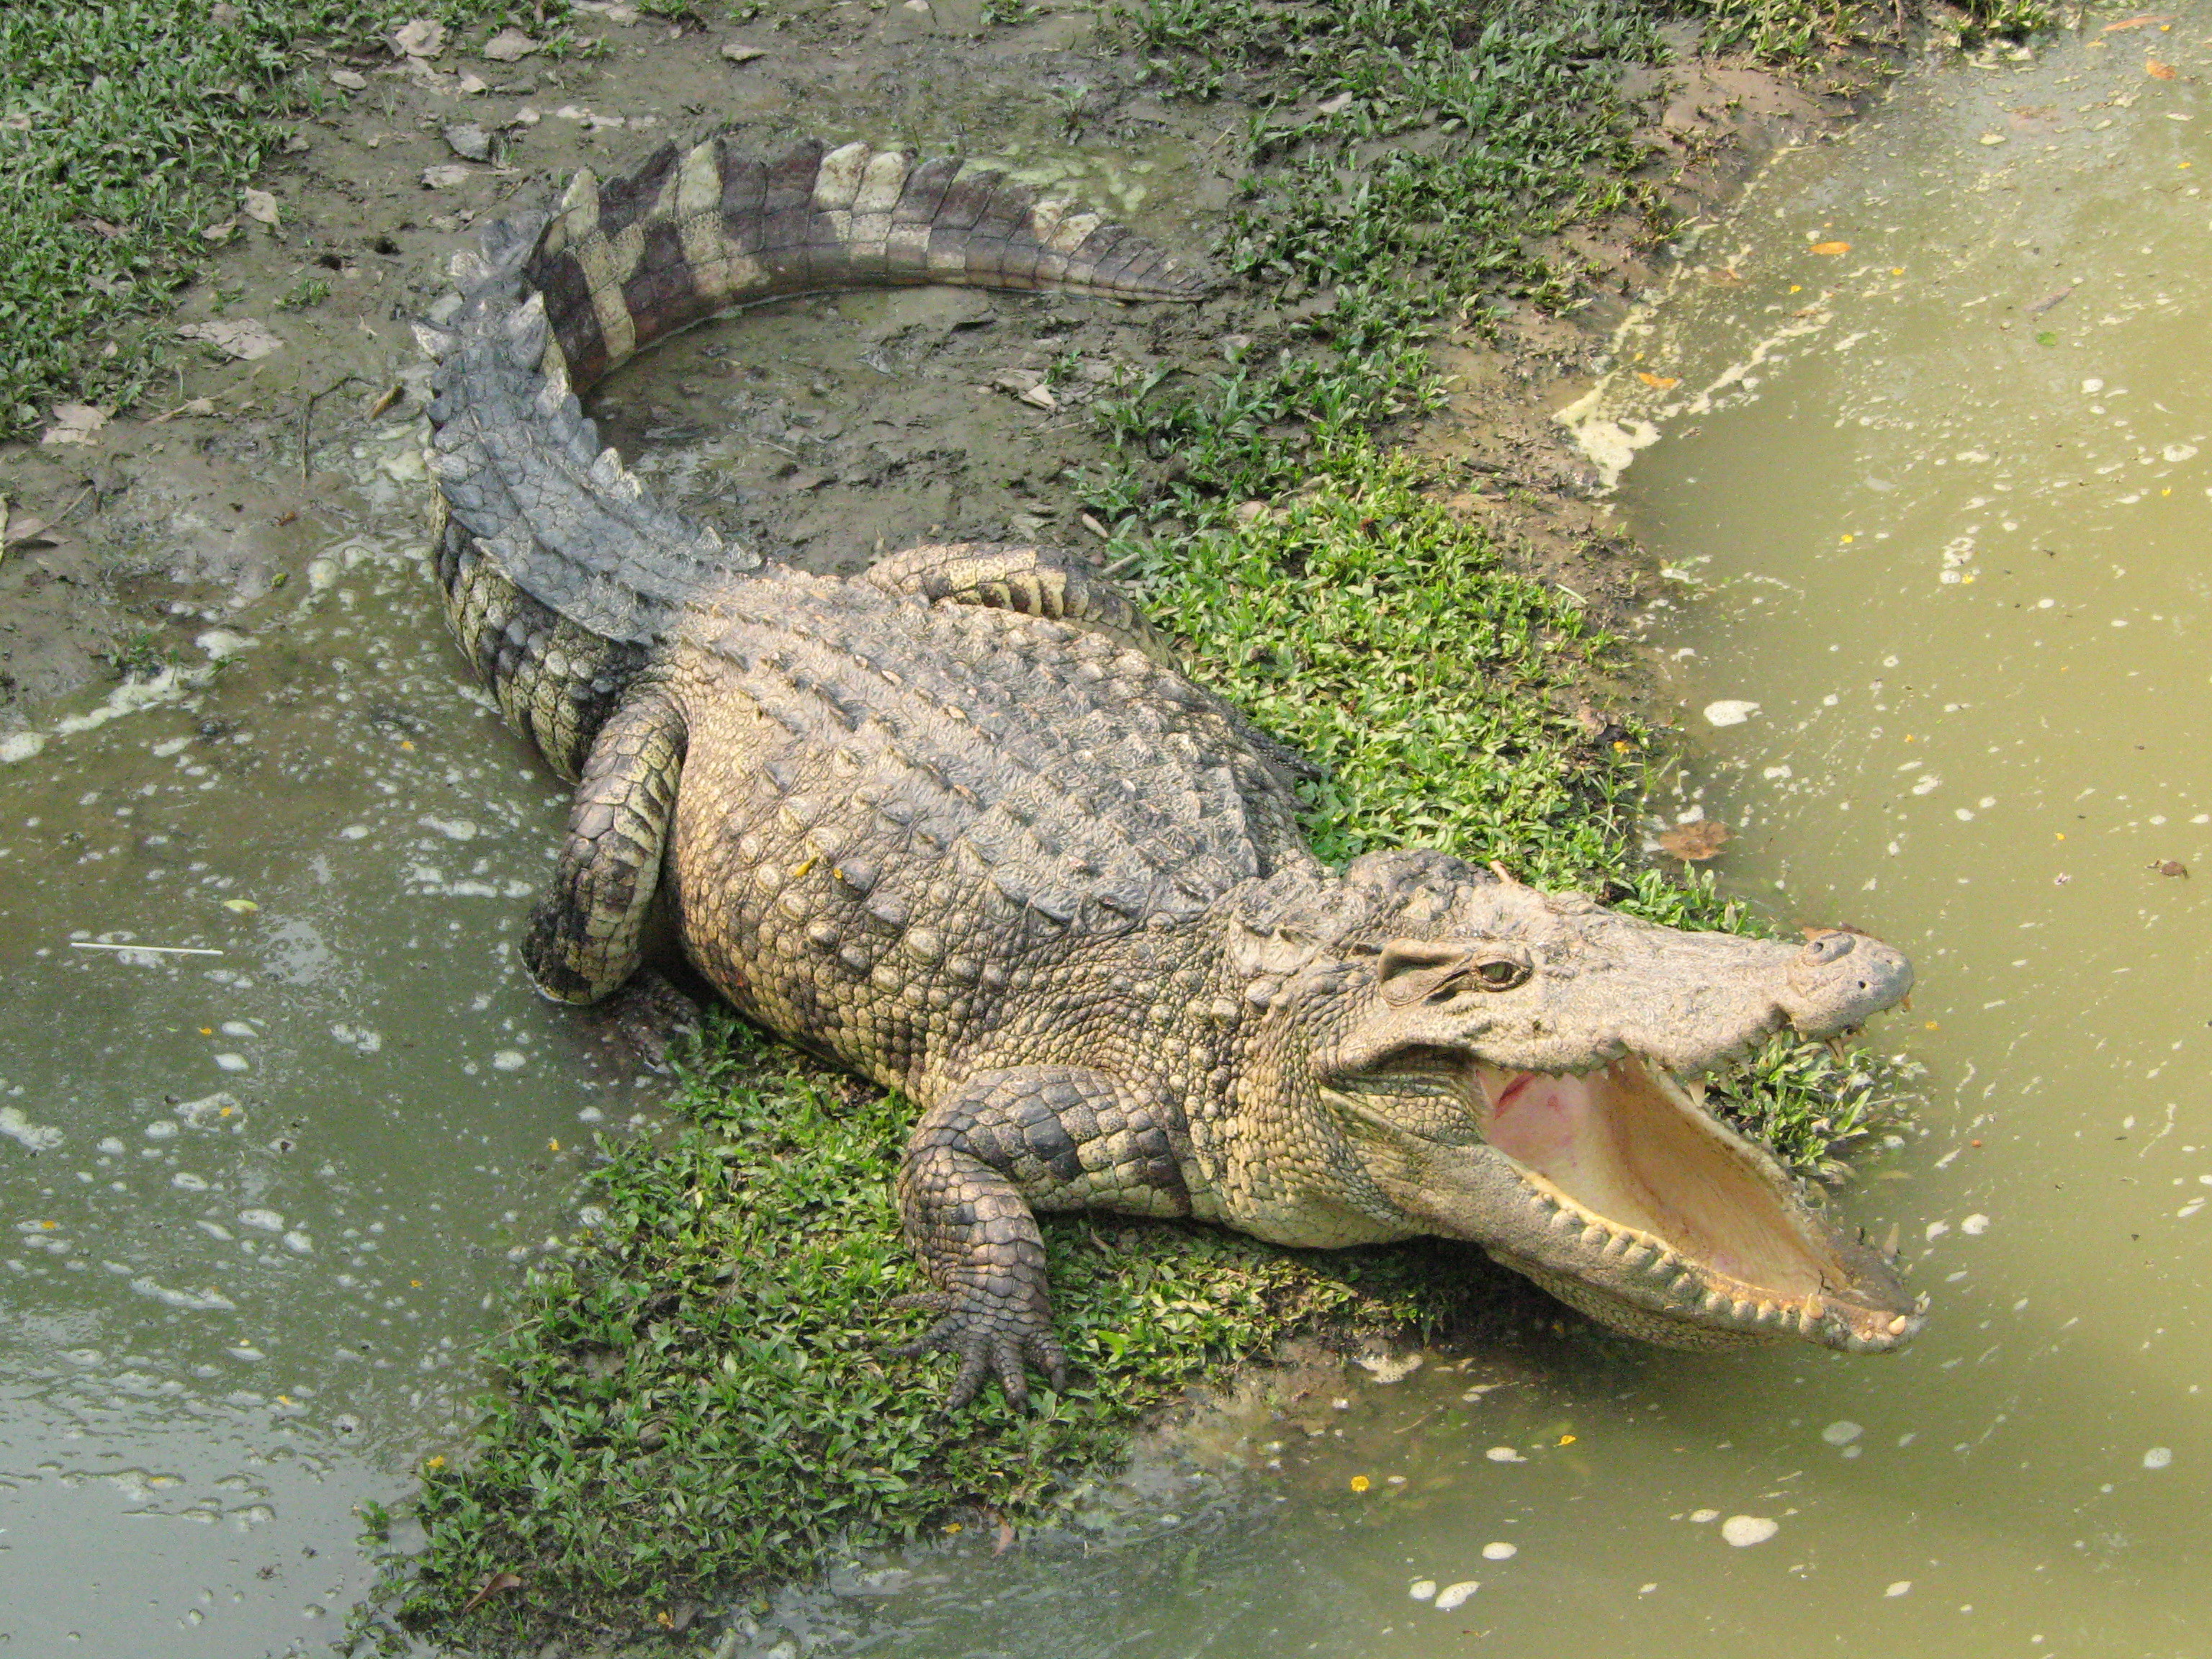 For some reason this guy thought it was a good idea to ride a crocodile